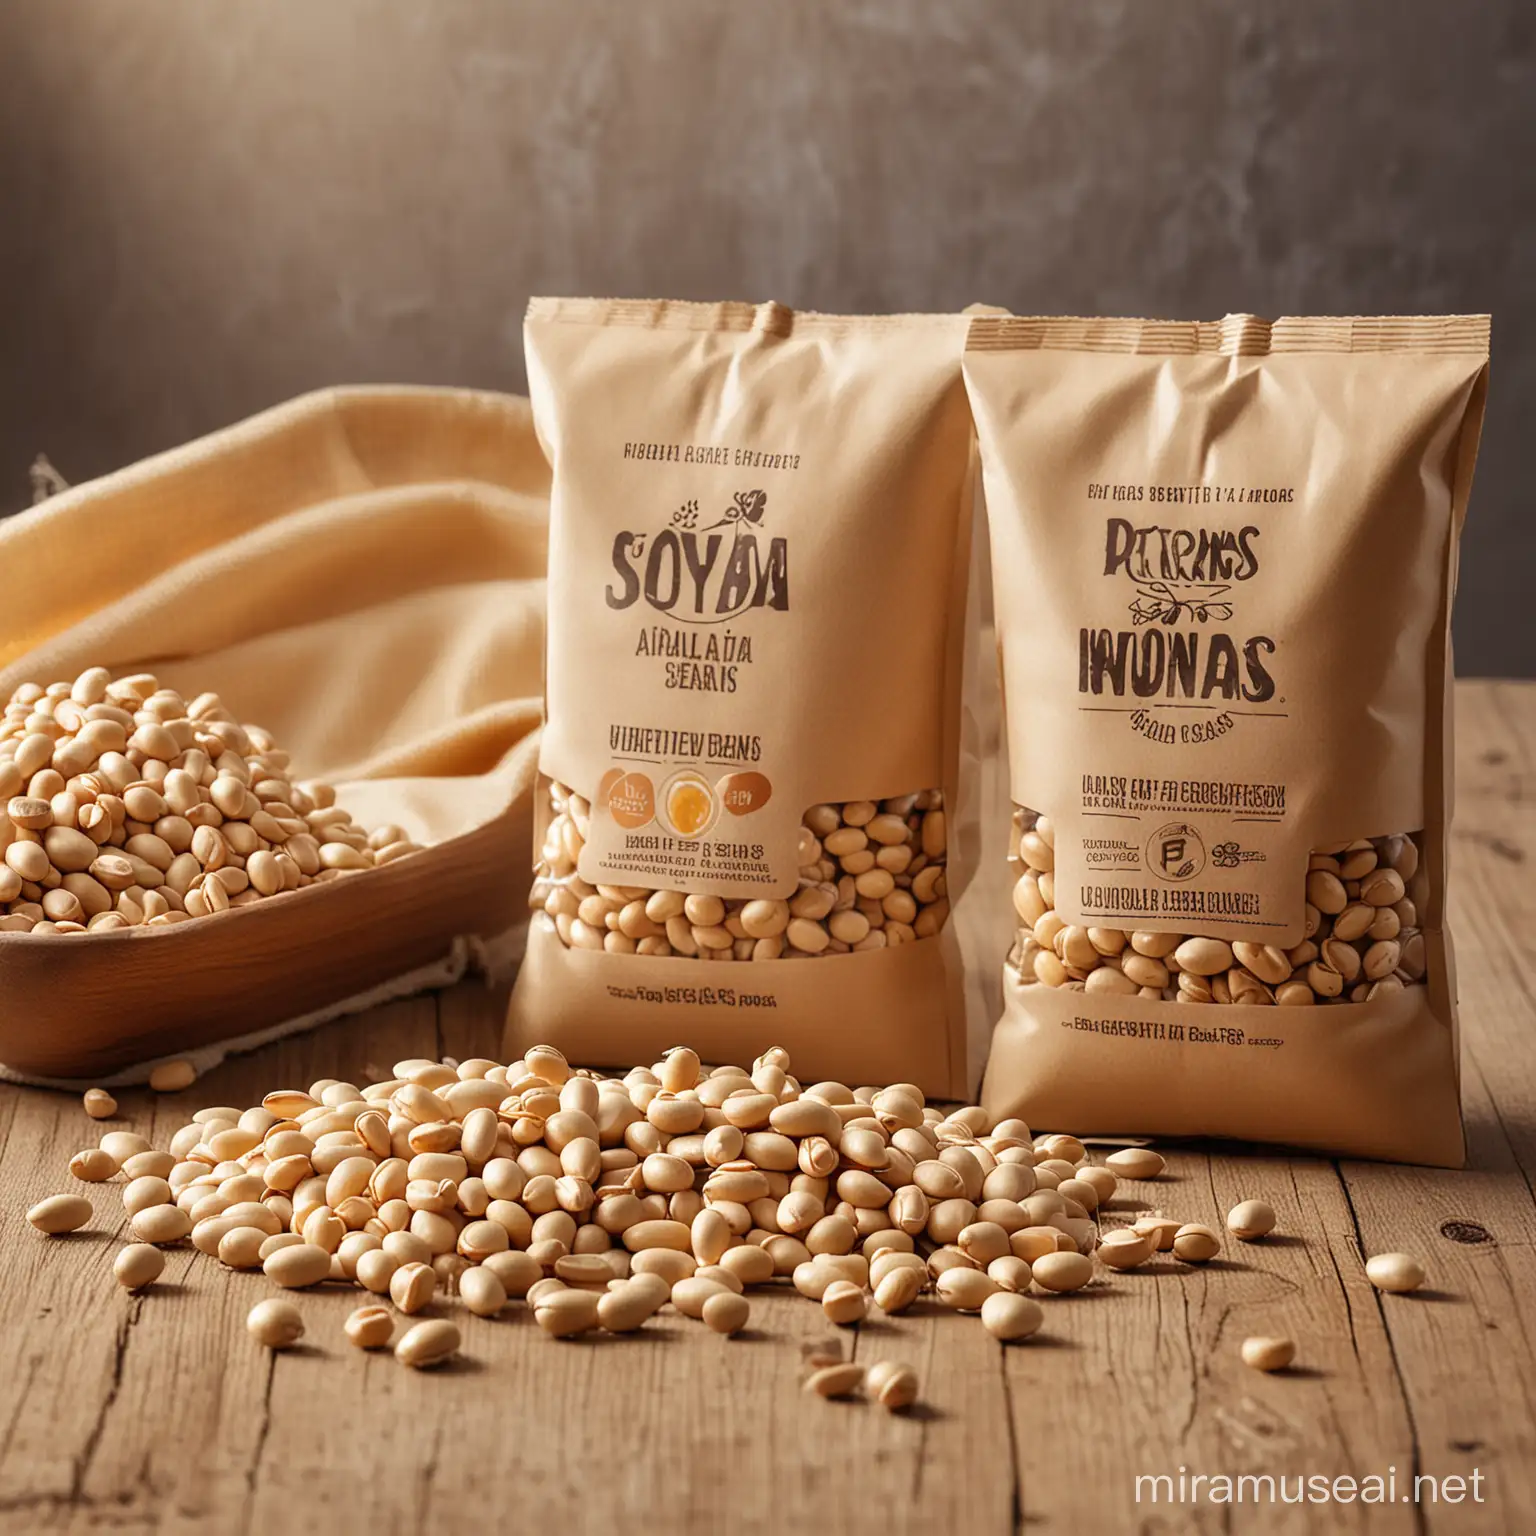 The image features a pack of high-quality soya beans placed on a wooden table against a natural background. The packaging is sleek and modern, with vibrant colors that stand out. Sunlight streams in, casting a warm glow on the beans and highlighting their natural texture. A few beans are spilled onto the table, adding to the organic feel of the scene. The overall composition evokes a sense of freshness and wholesomeness, perfect for showcasing the product's natural goodness.